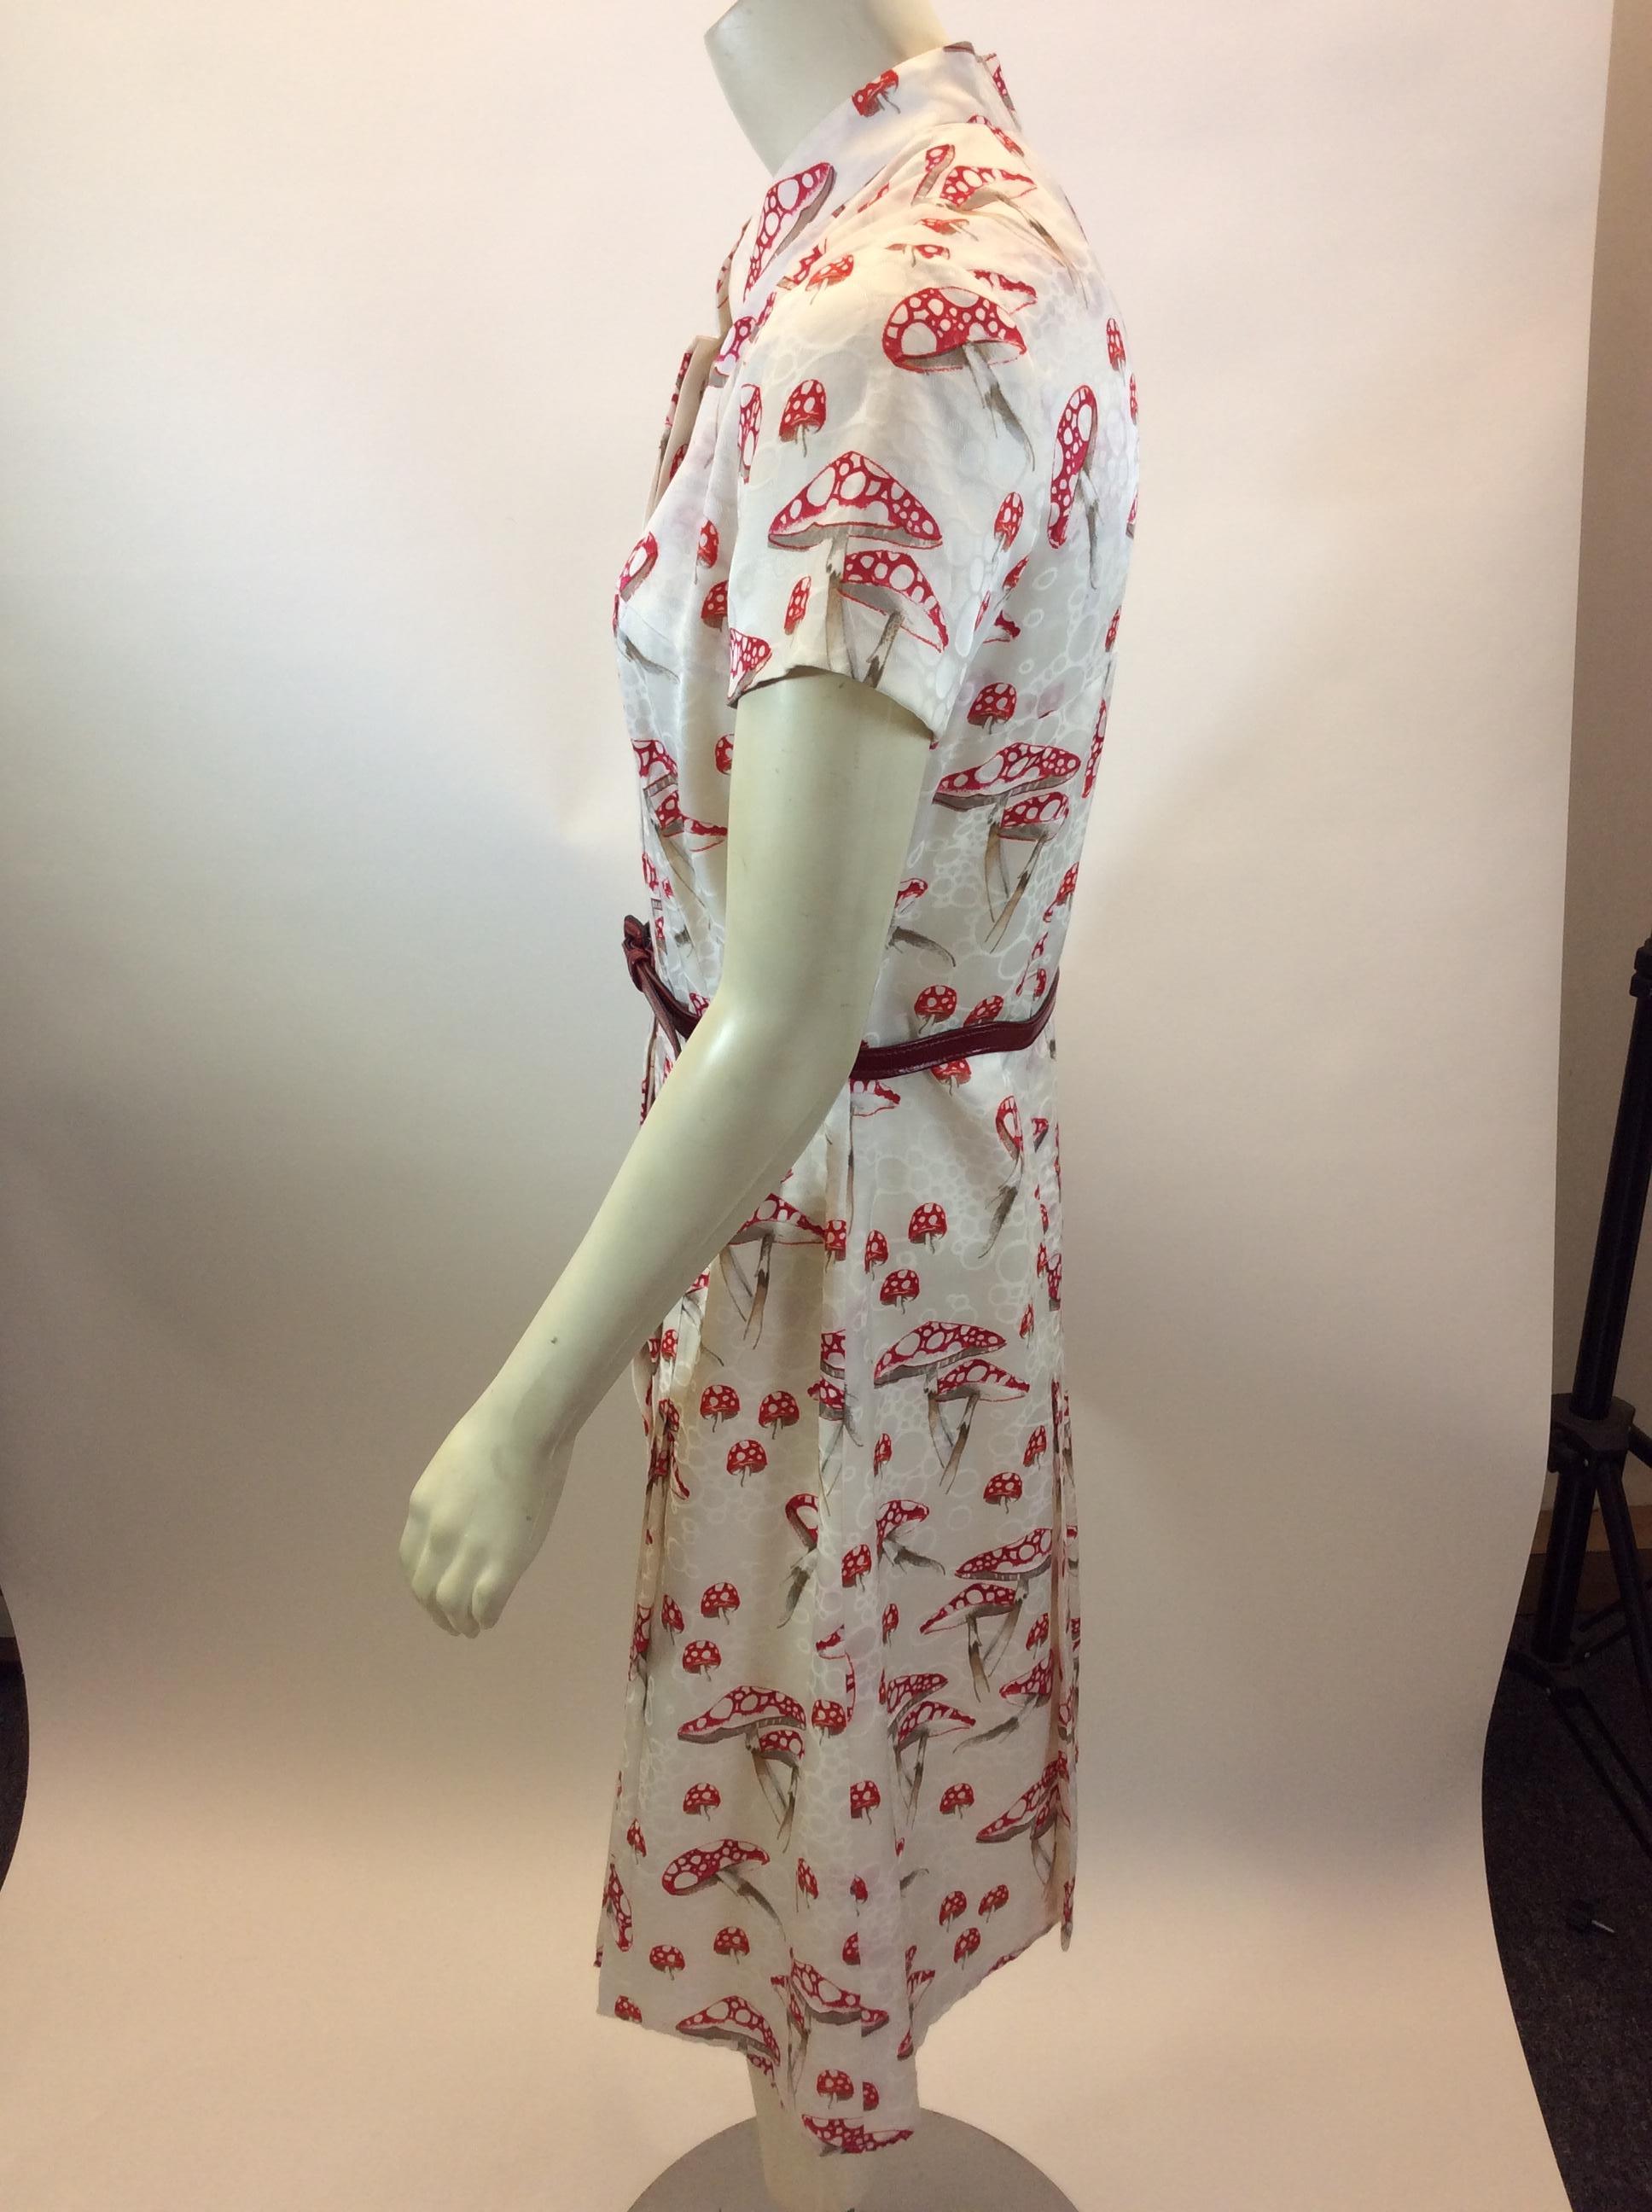 Carolina Herrera White and Red Mushroom Print Dress
Comes with belt
$299
Made in the US
Size 6
Length 40